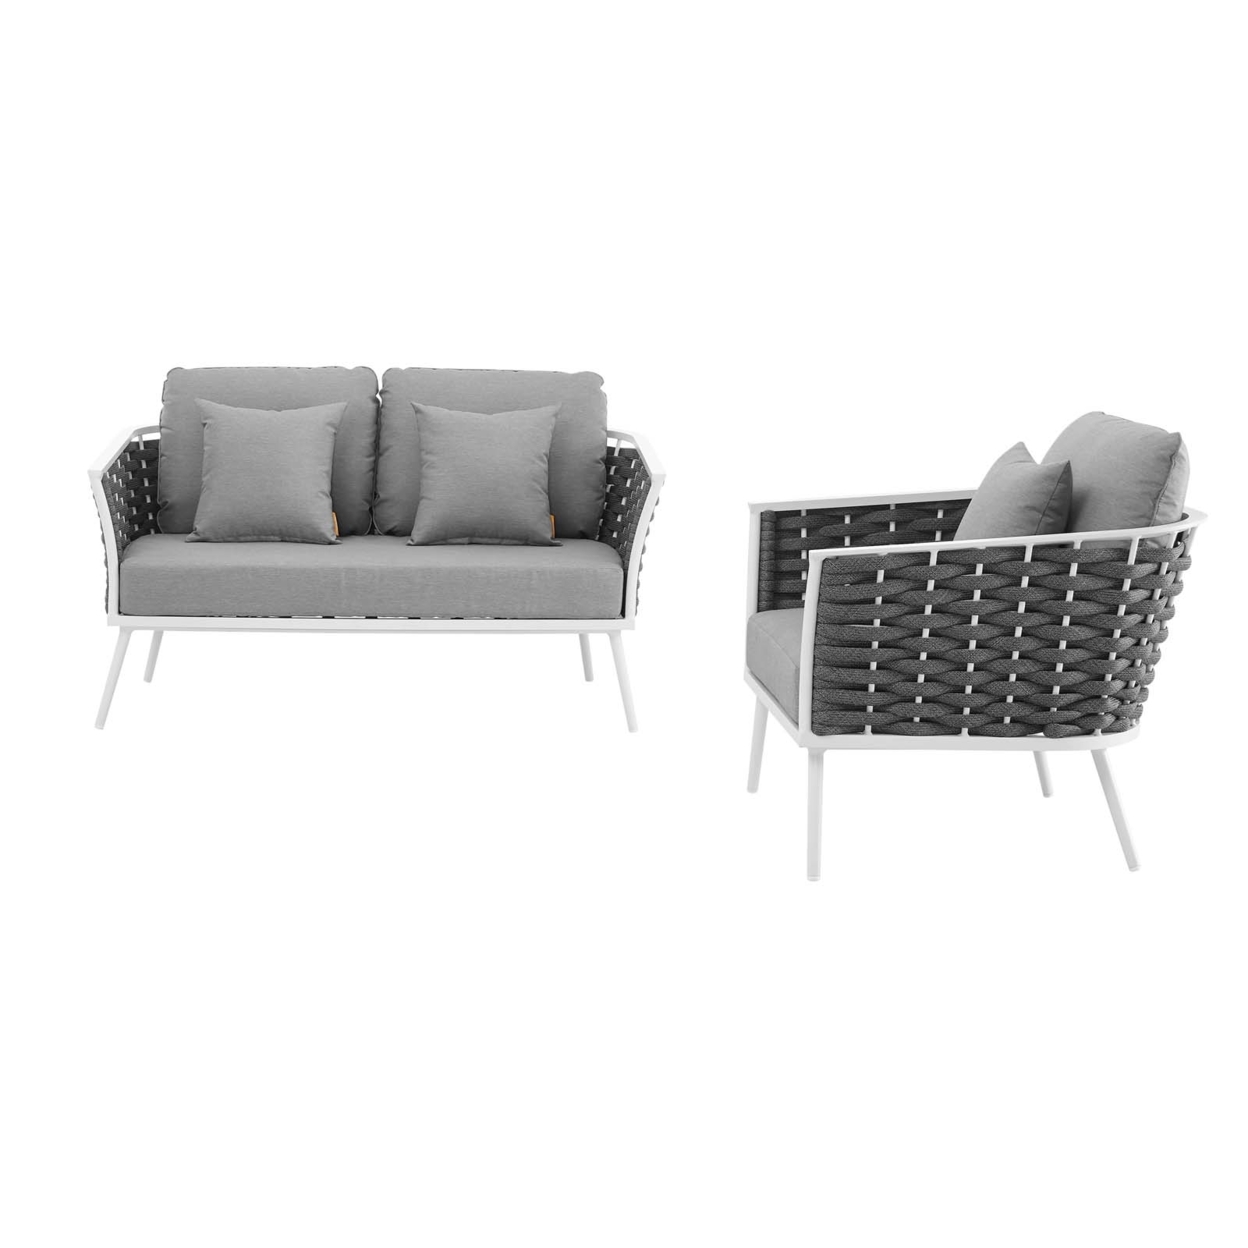 Stance 2 Piece Outdoor Patio Aluminum Sectional Sofa Set, White Gray